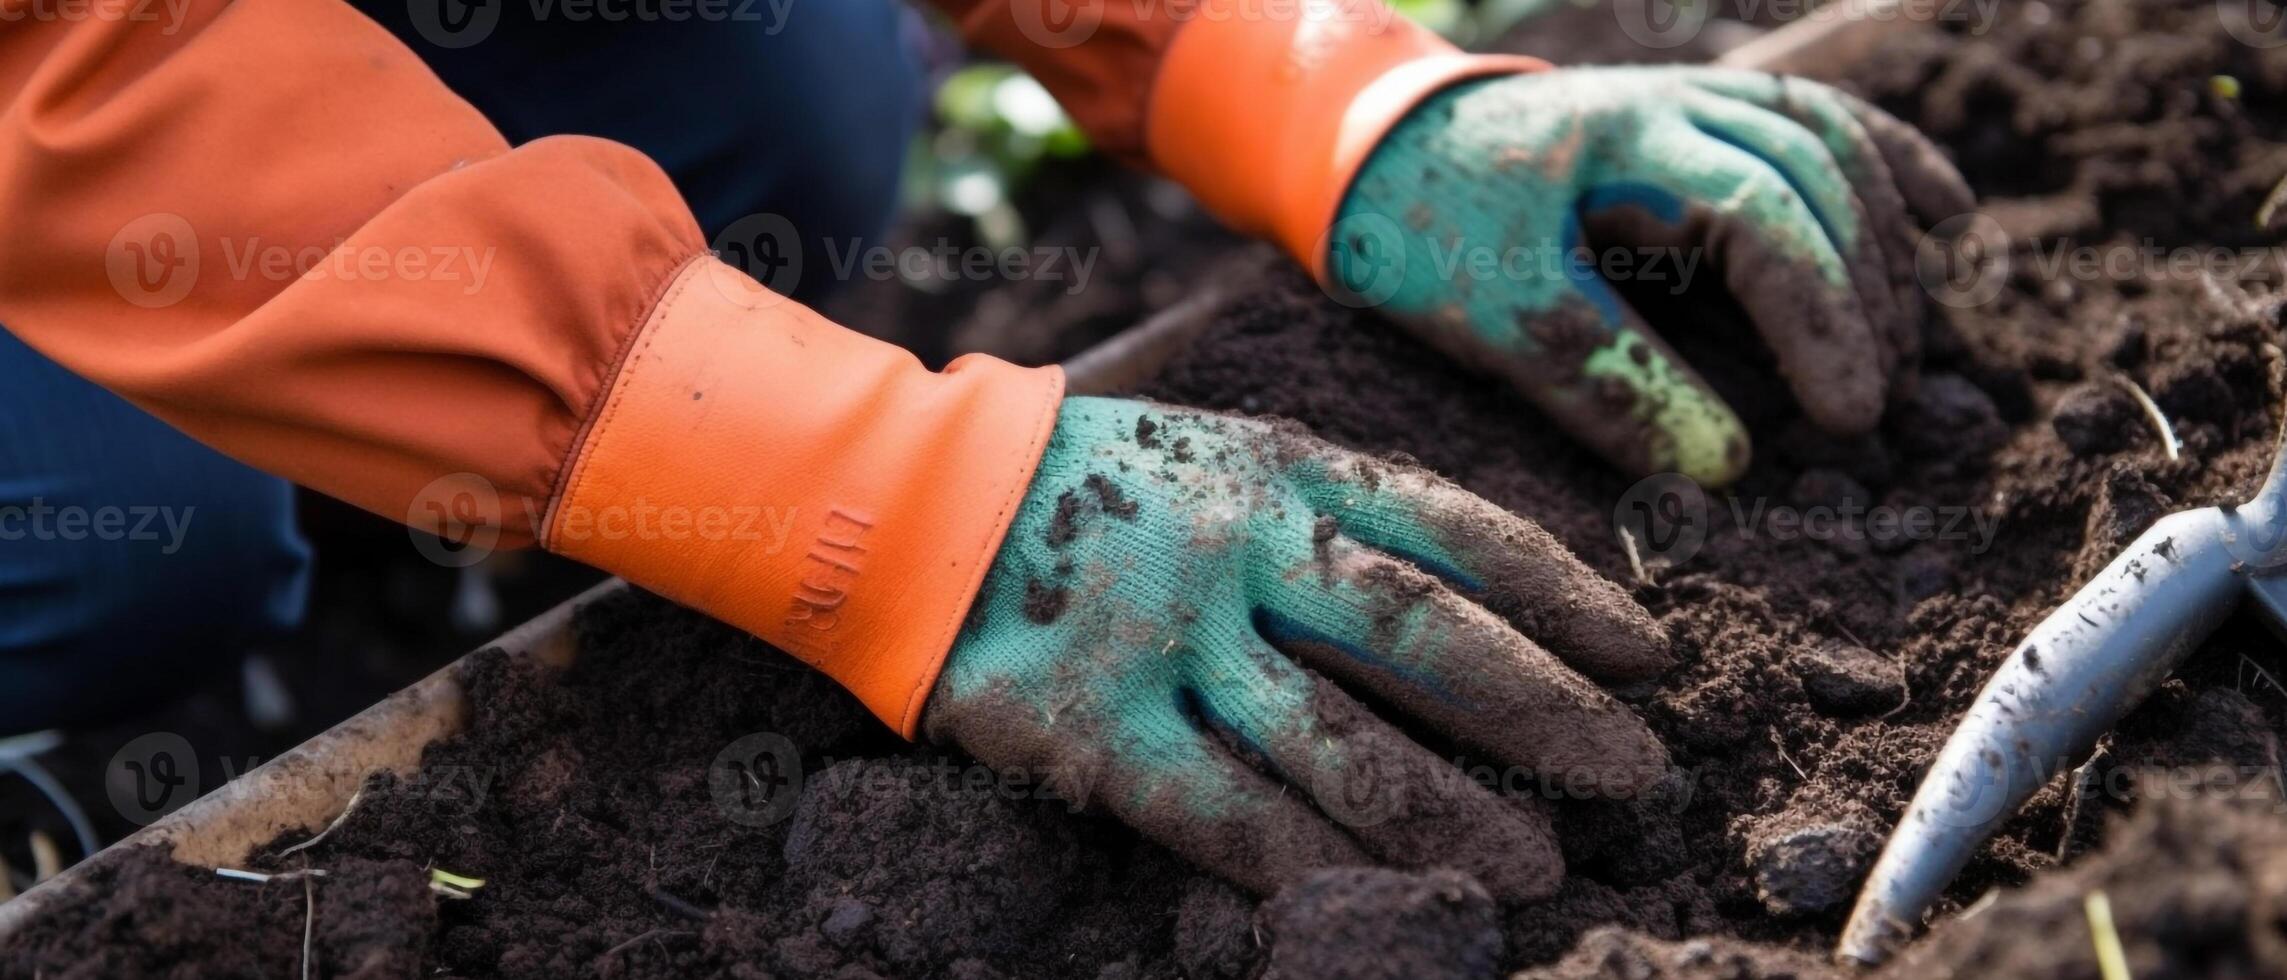 Closeup image of woman s hands in gardening gloves planting tomato. photo